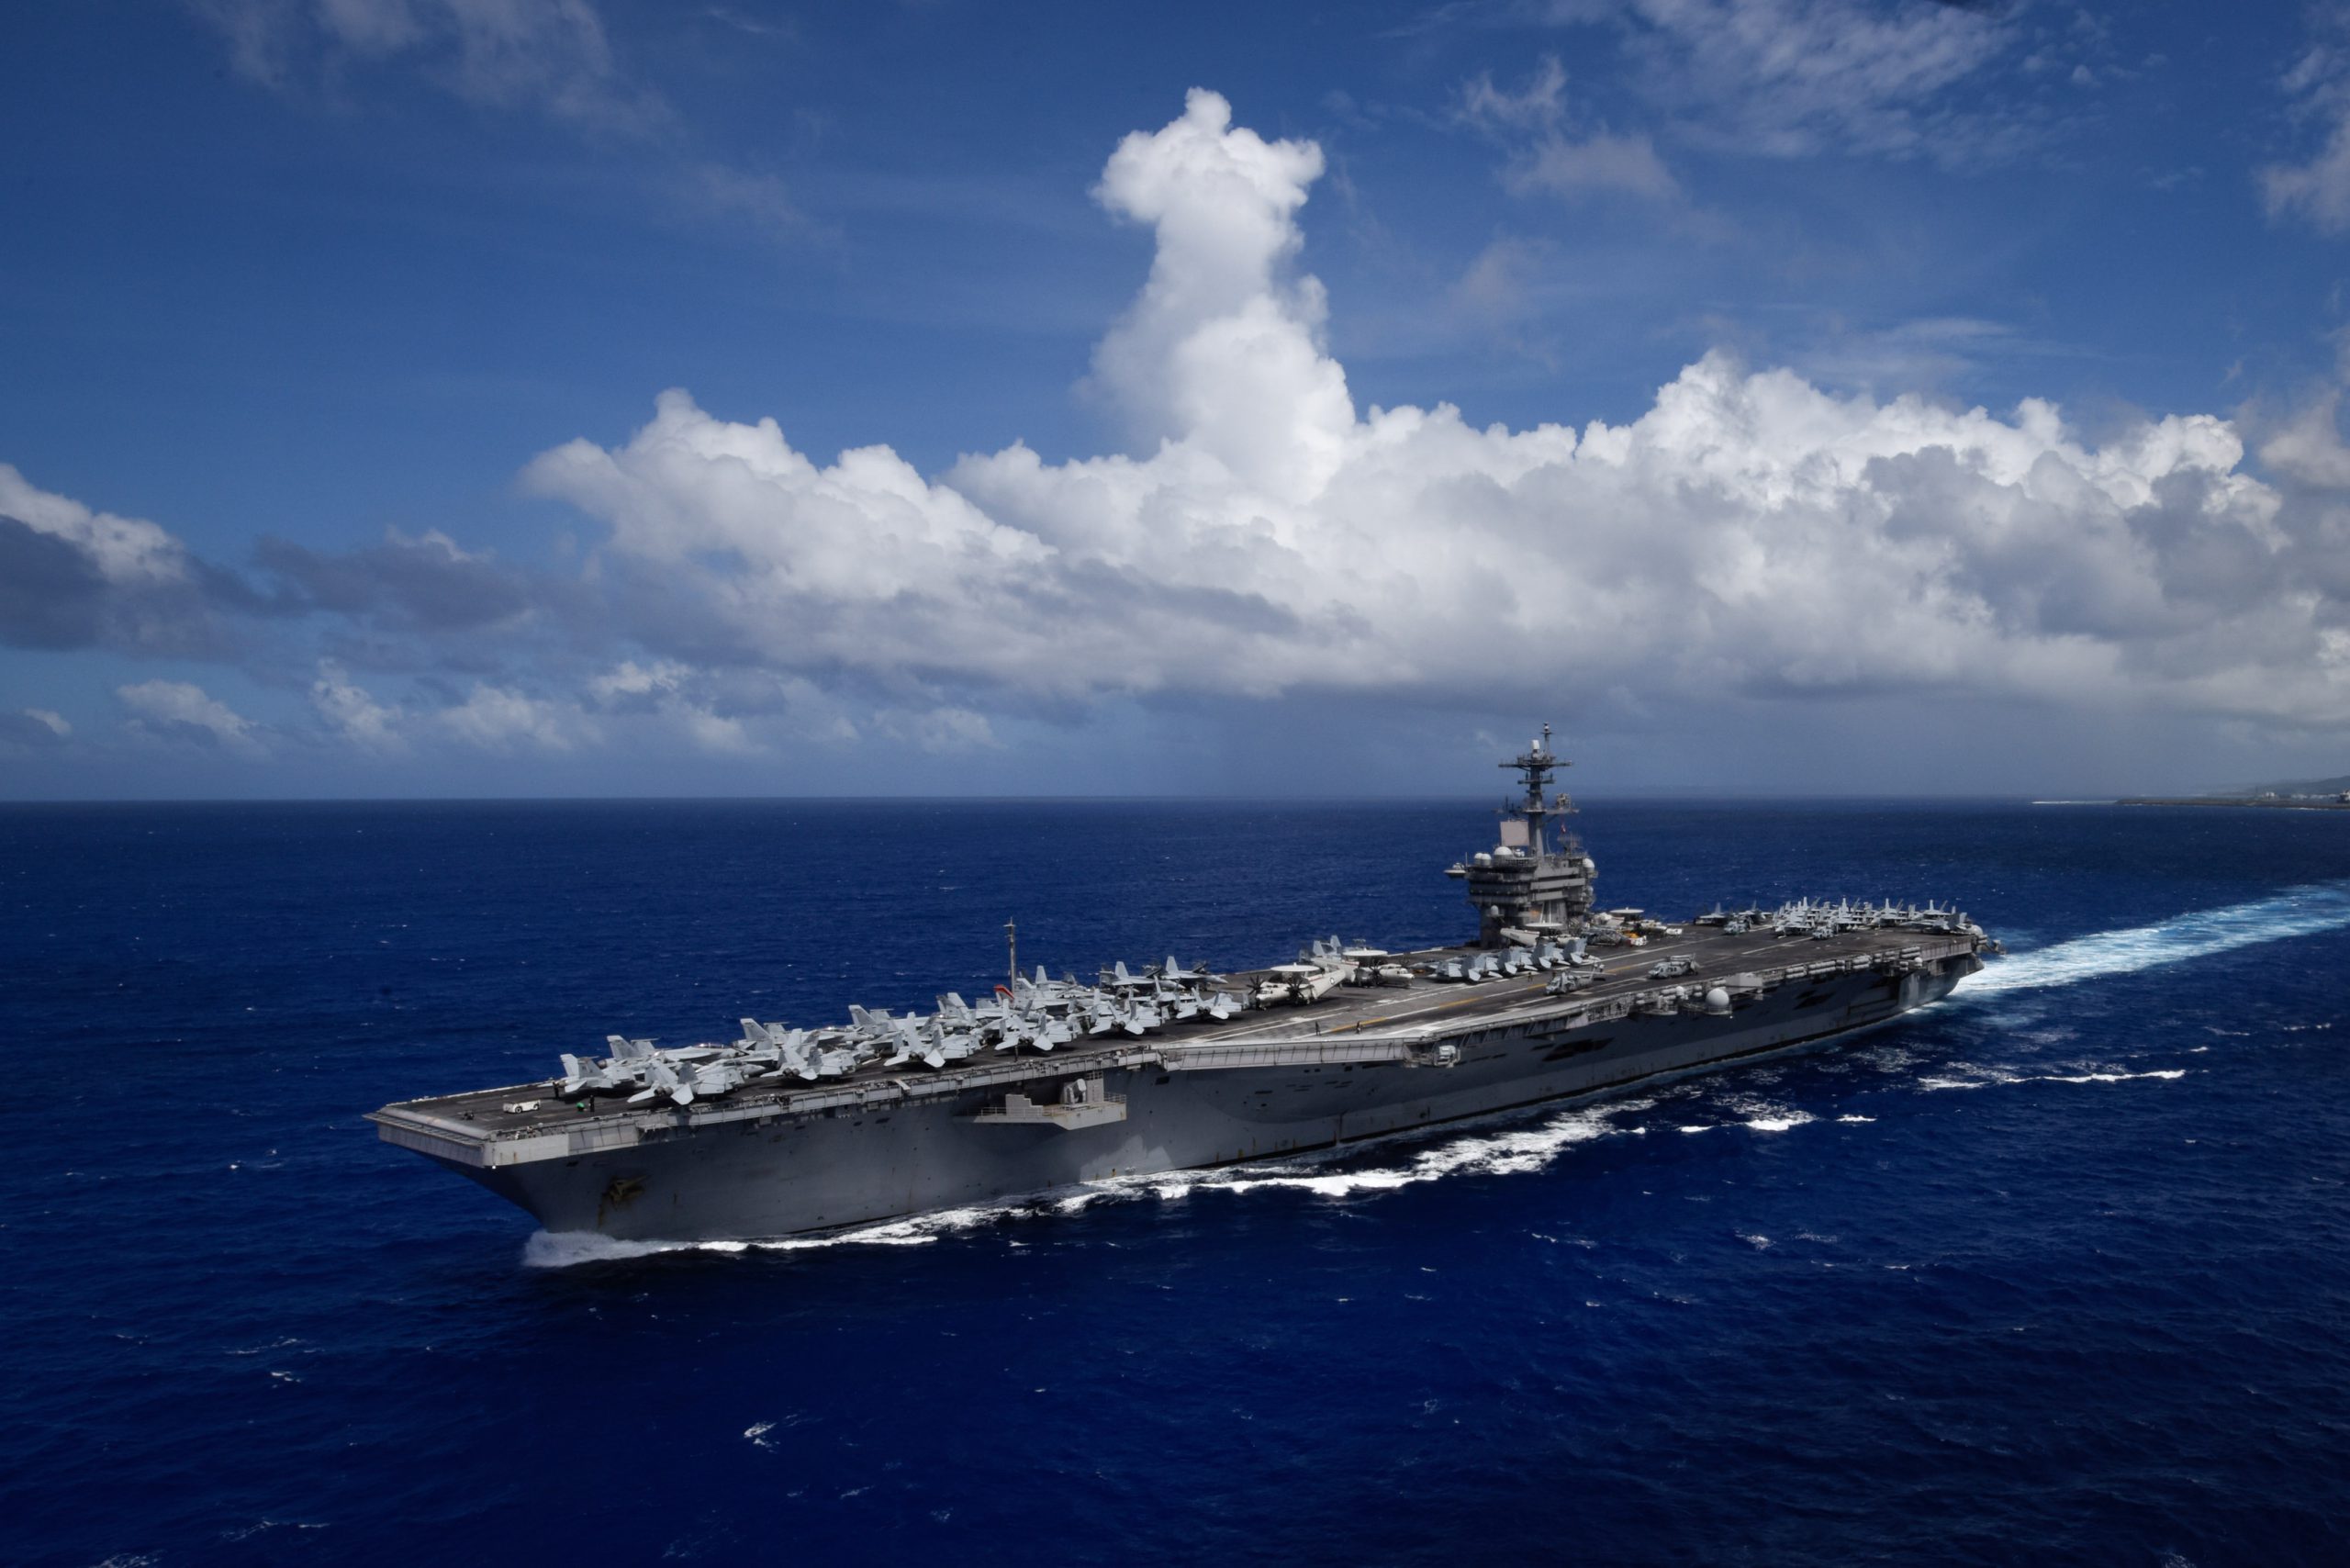 PACIFIC OCEAN (Nov. 4, 2017) The aircraft carrier USS Theodore Roosevelt (CVN 71) transits the Pacific Ocean. Theodore Roosevelt is deployed in the U.S. 7th Fleet area of operations in support of maritime security operations and theater security cooperation efforts. U.S. Navy photo by Mass Communication Specialist 3rd Class Anthony J. Rivera. -